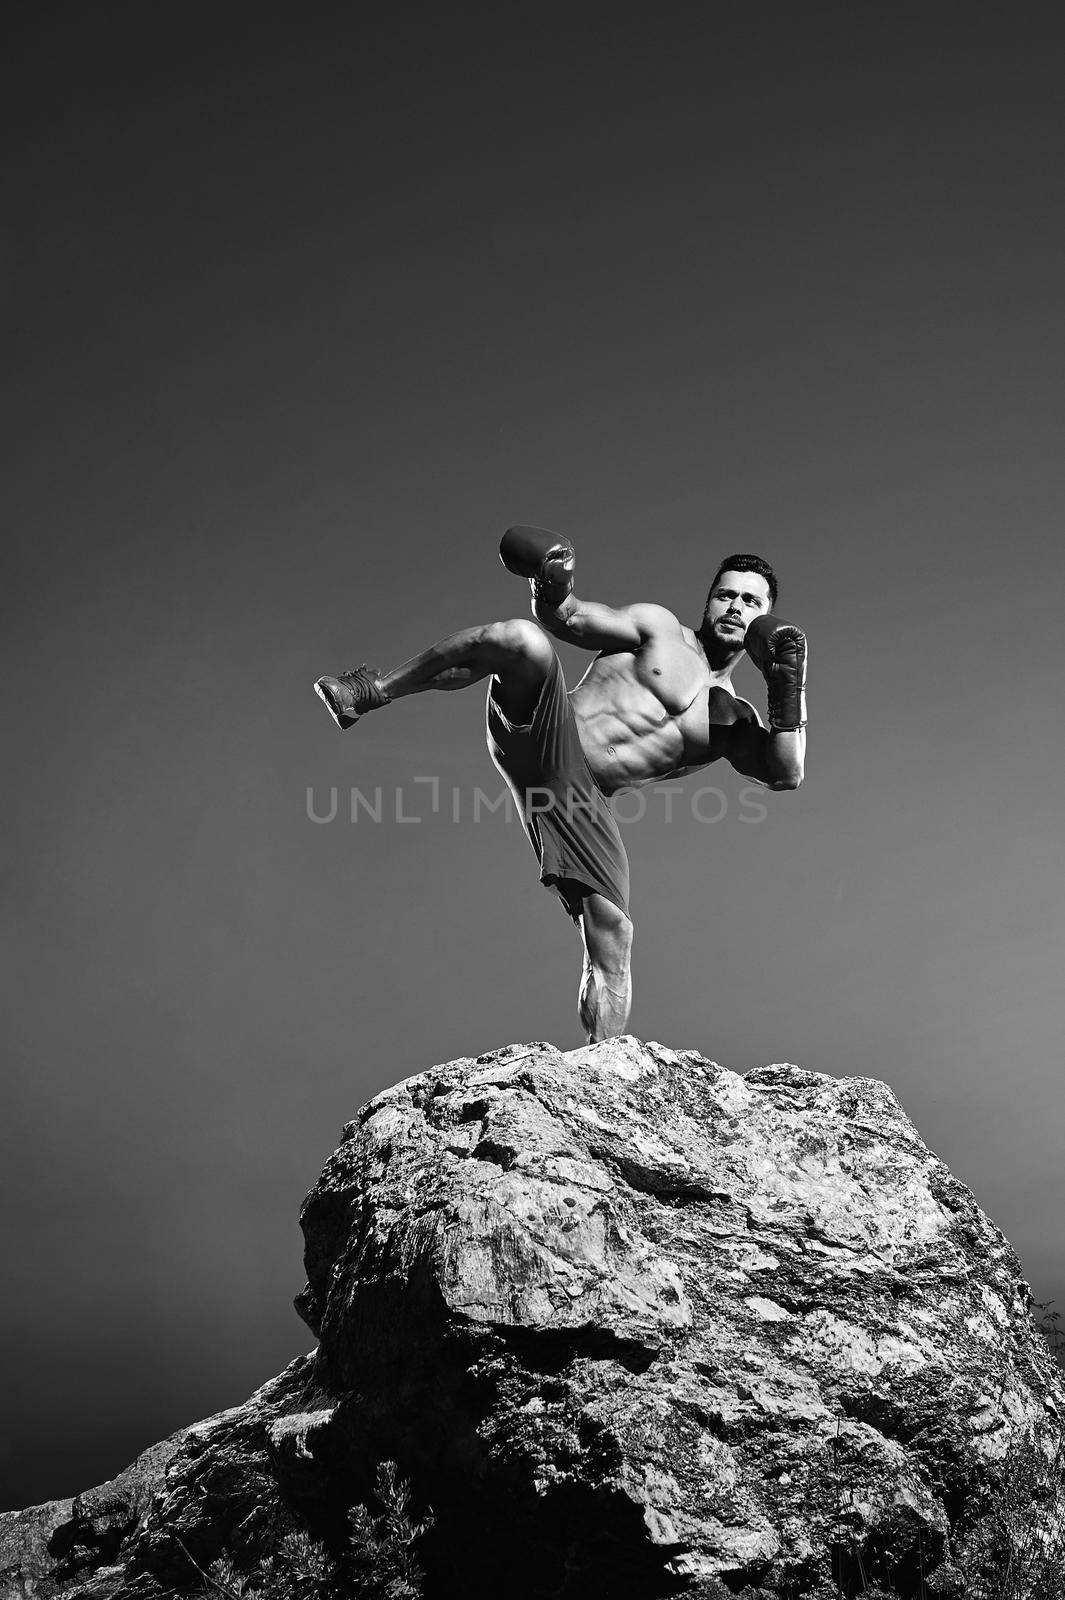 Black and white portrait of a male fighter training outdoors performing kickboxing technique boxing kicking strength balance martial combat fighting masculinity abs fitness sportive athlete physique.